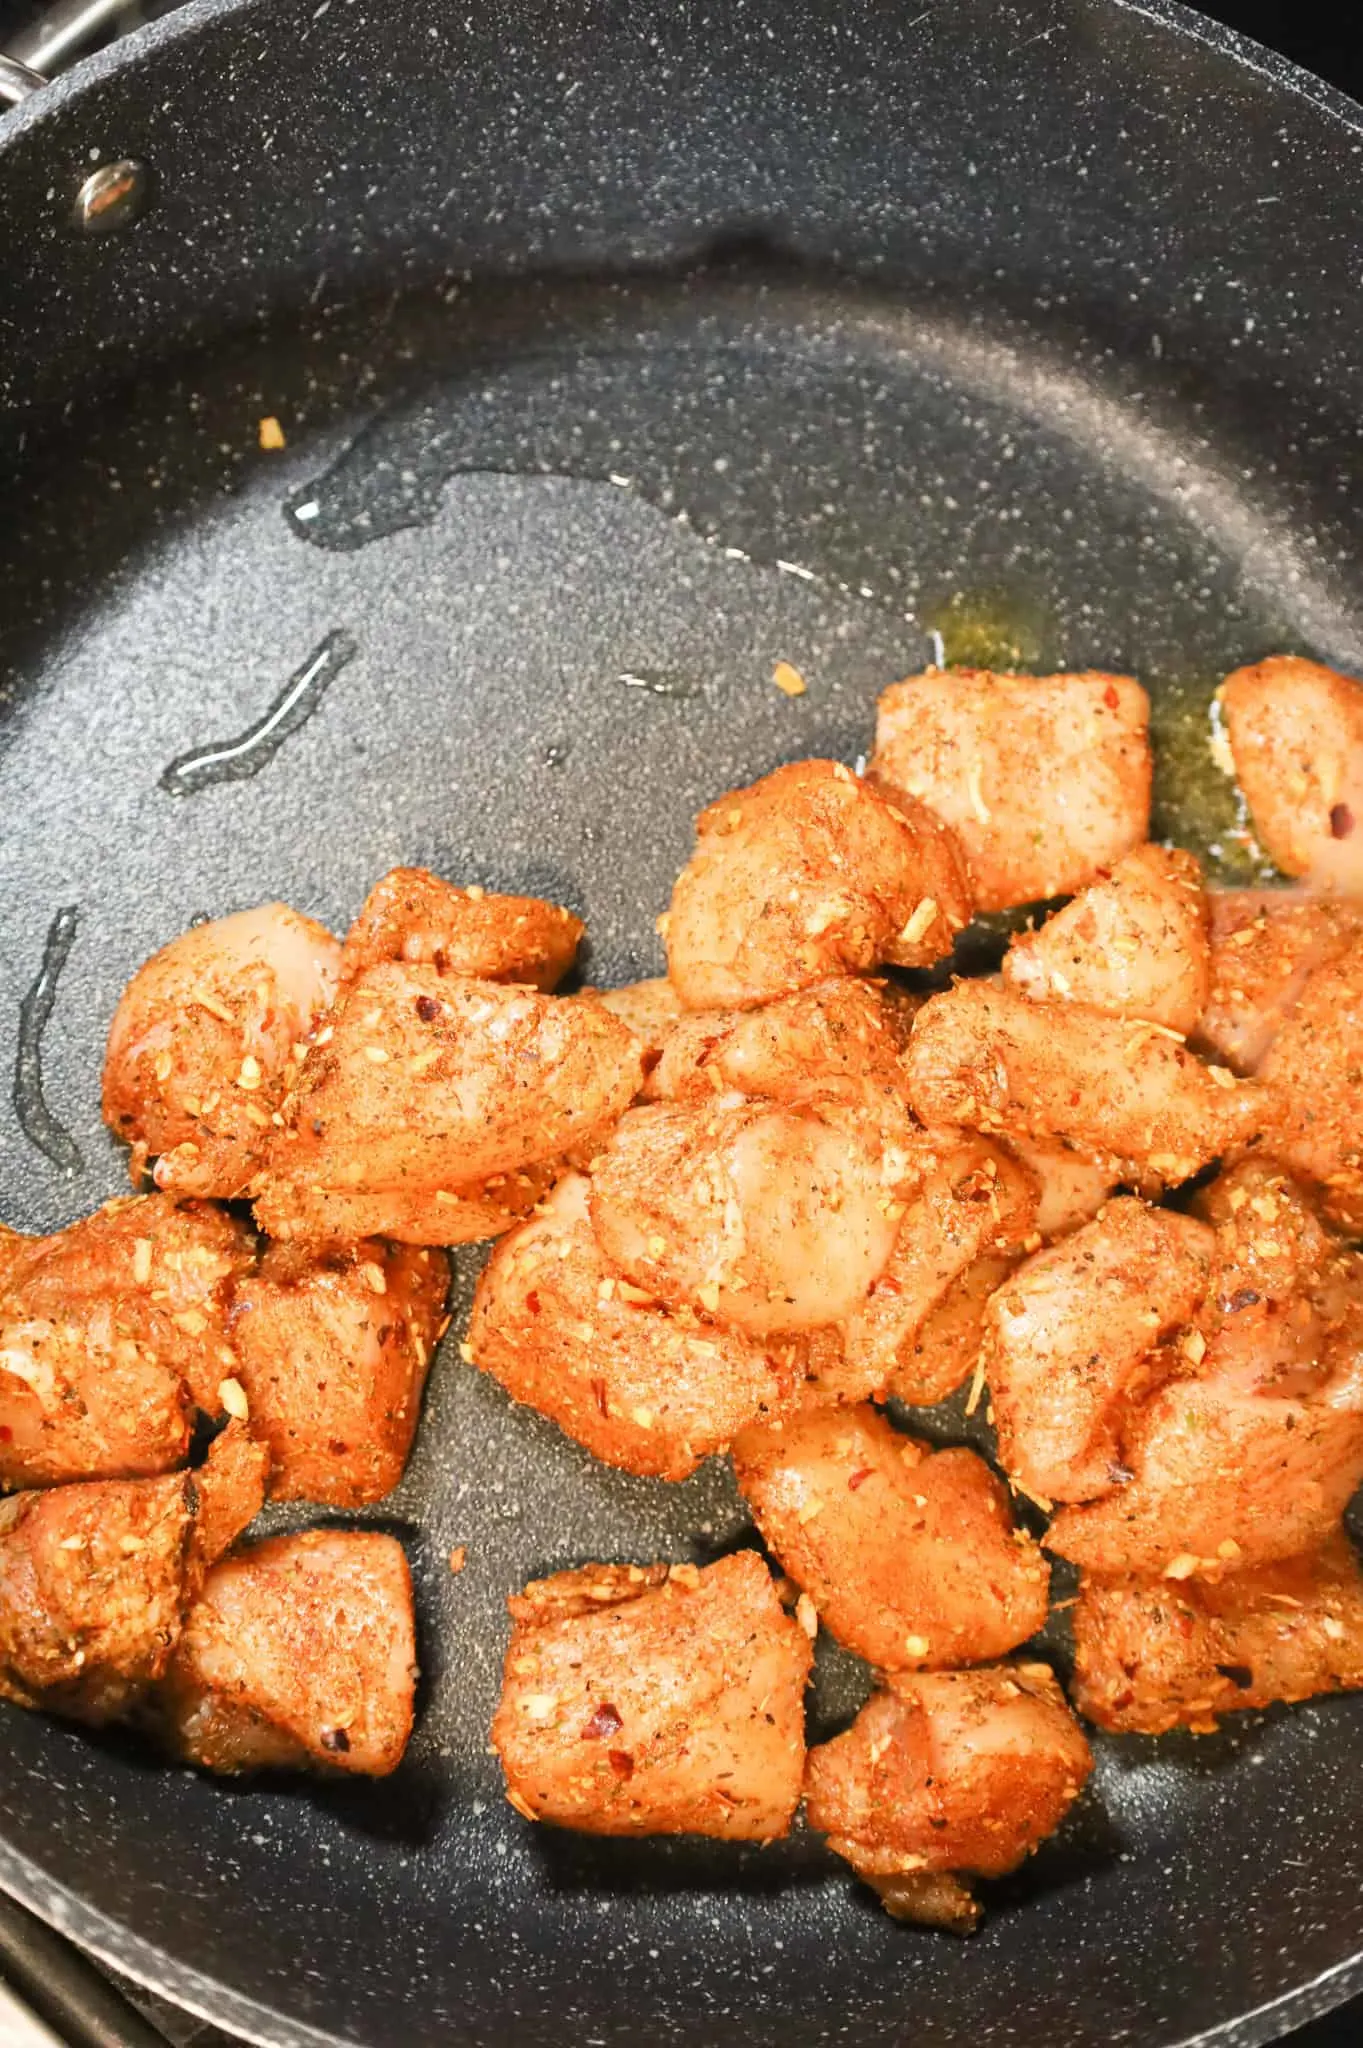 Cajun seasoned chicken breast chunks added to a hot skillet